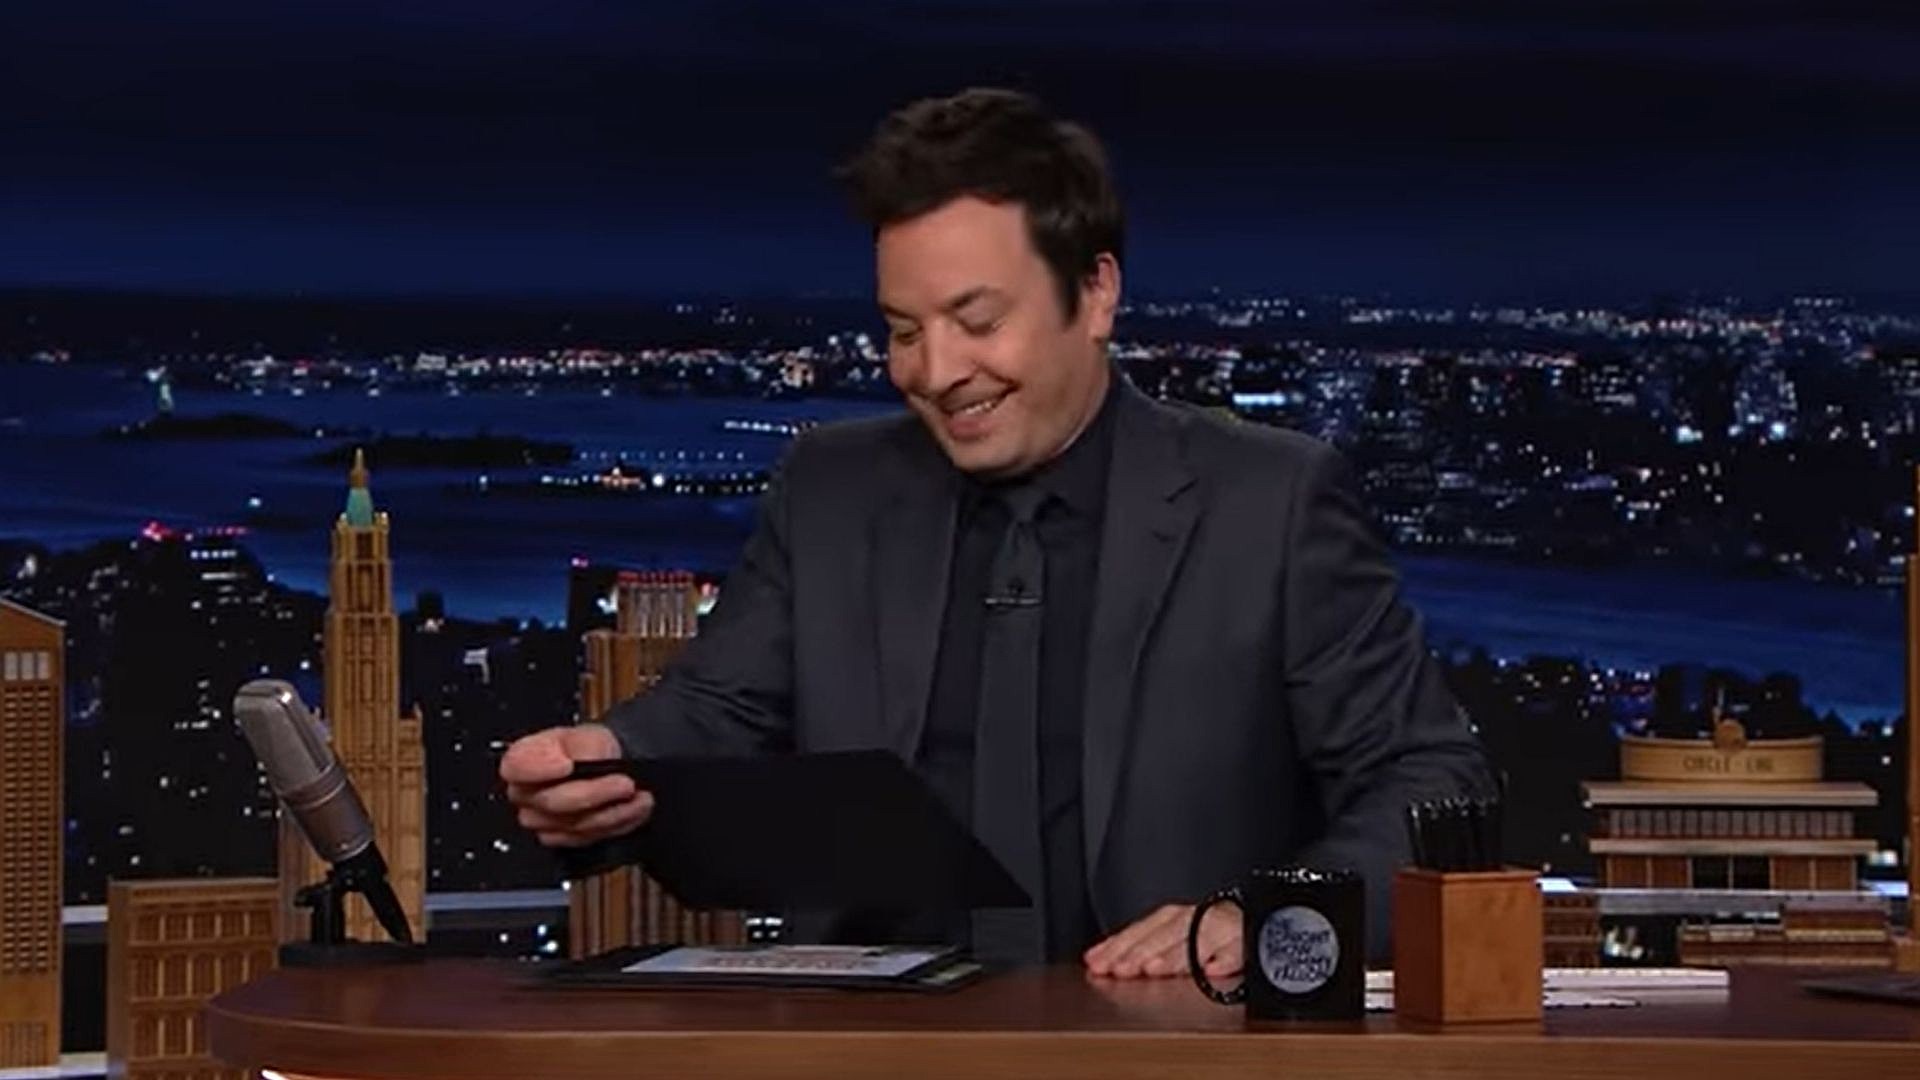 AUDIO: Jimmy Fallon, Robert Downey Jr. And More Celebrity Guests